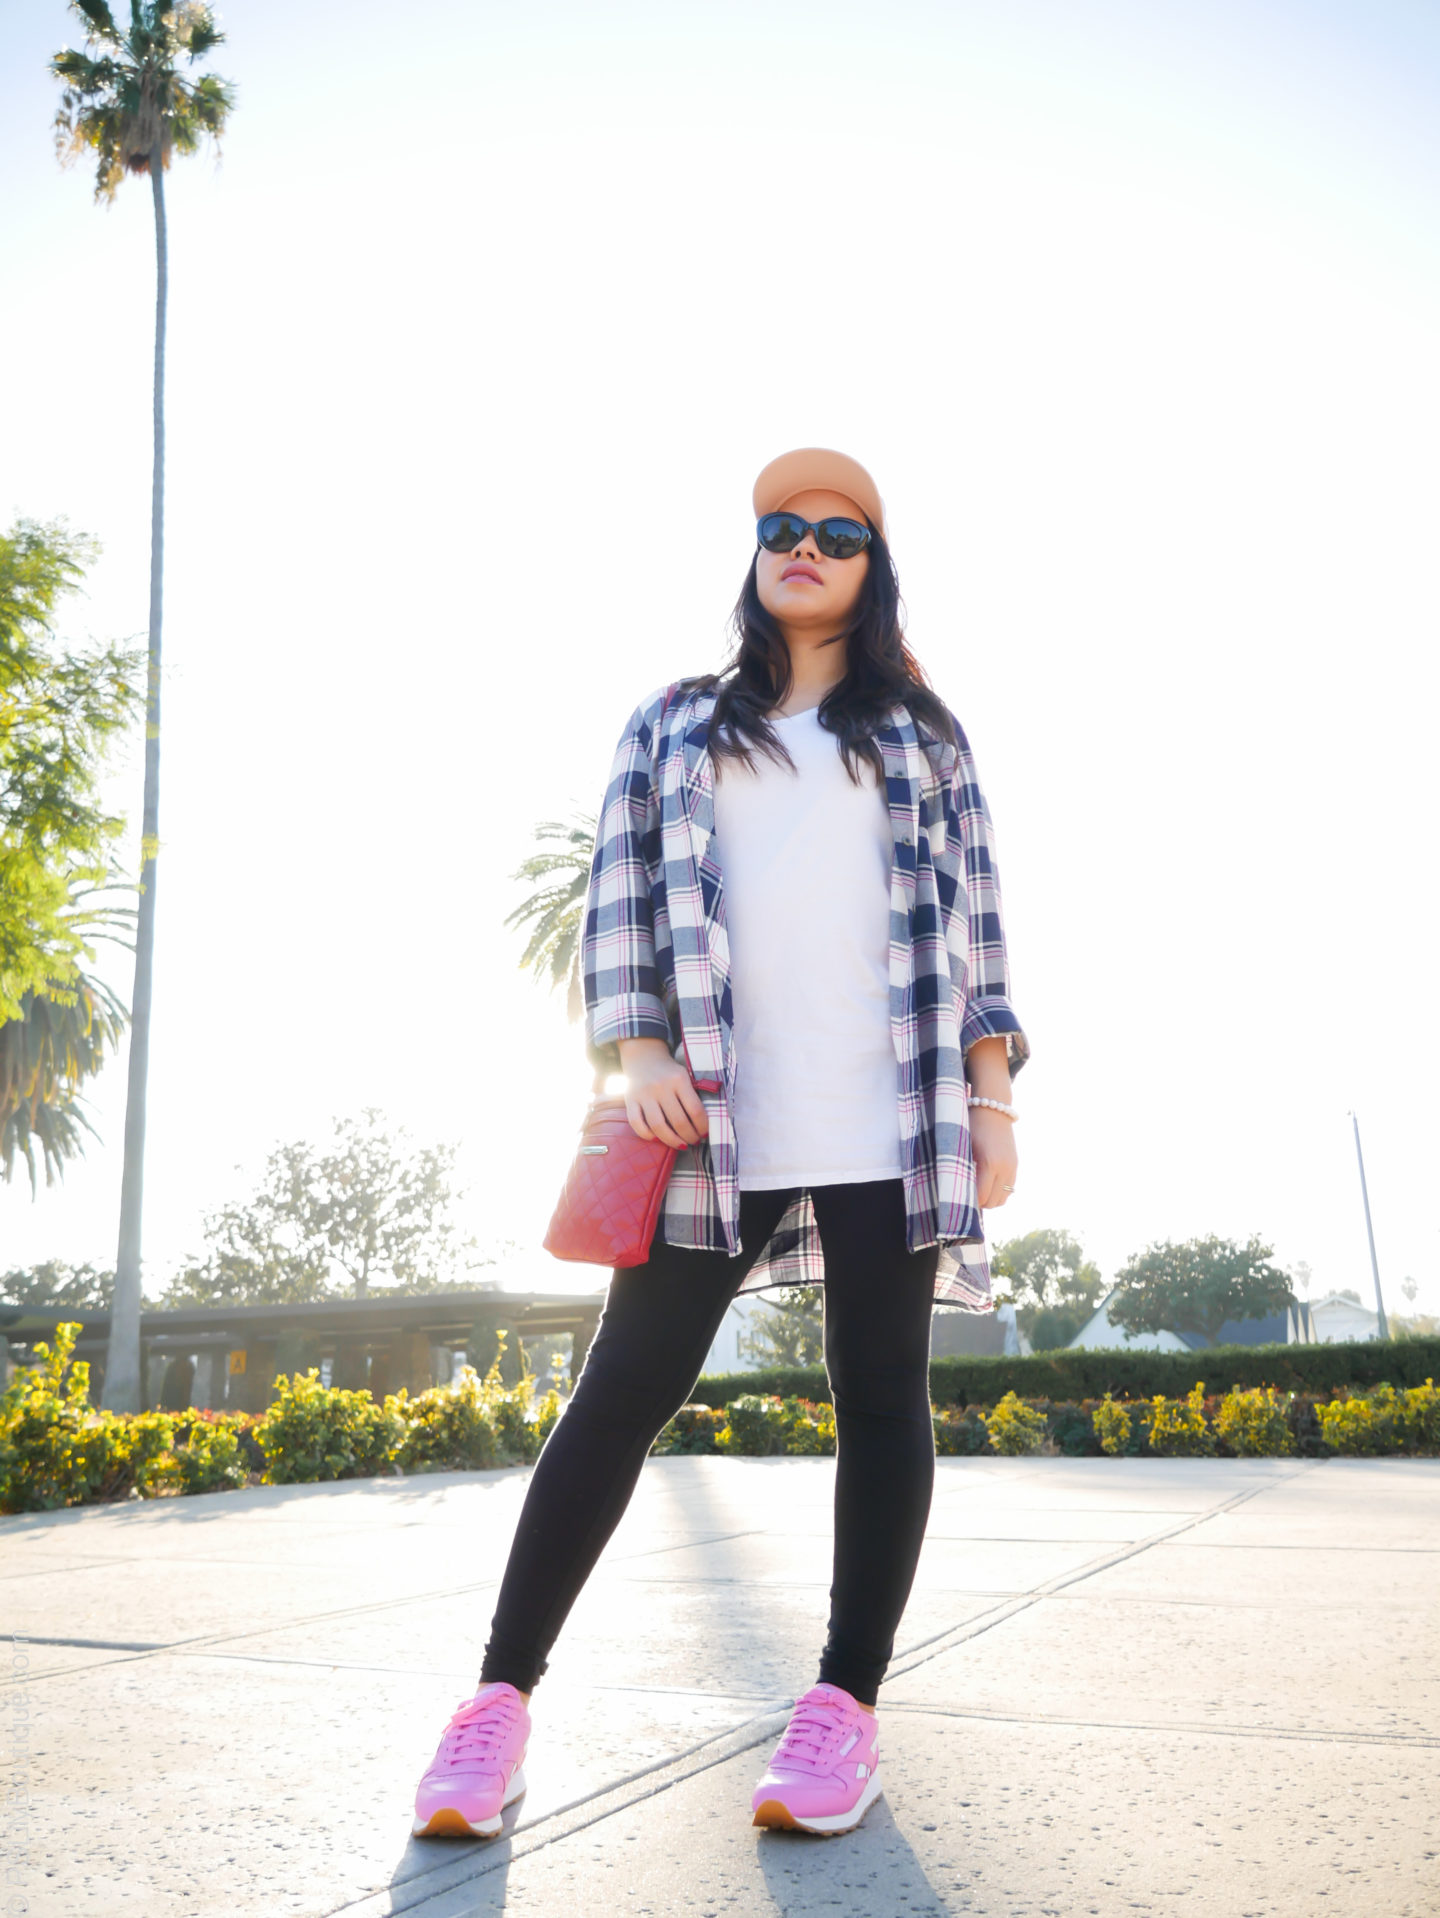 Gone Plaid... | PSLily Boutique, Pink leather Reebok classic sneakers shoes, Instagram: @pslilyboutique, Pinterest, Los Angeles fashion blogger, top fashion blog, best fashion blog, fashion & personal style blog, travel blog, LA fashion blogger, forever 21 black leggings, white tee, KUT from the Kloth blue and white plaid shirt, winter 2018 outfit ideas, pink H&M hat, Street fashion, casual, wiw, what i wore, 2.6.18 , palm trees, Tuesday, park